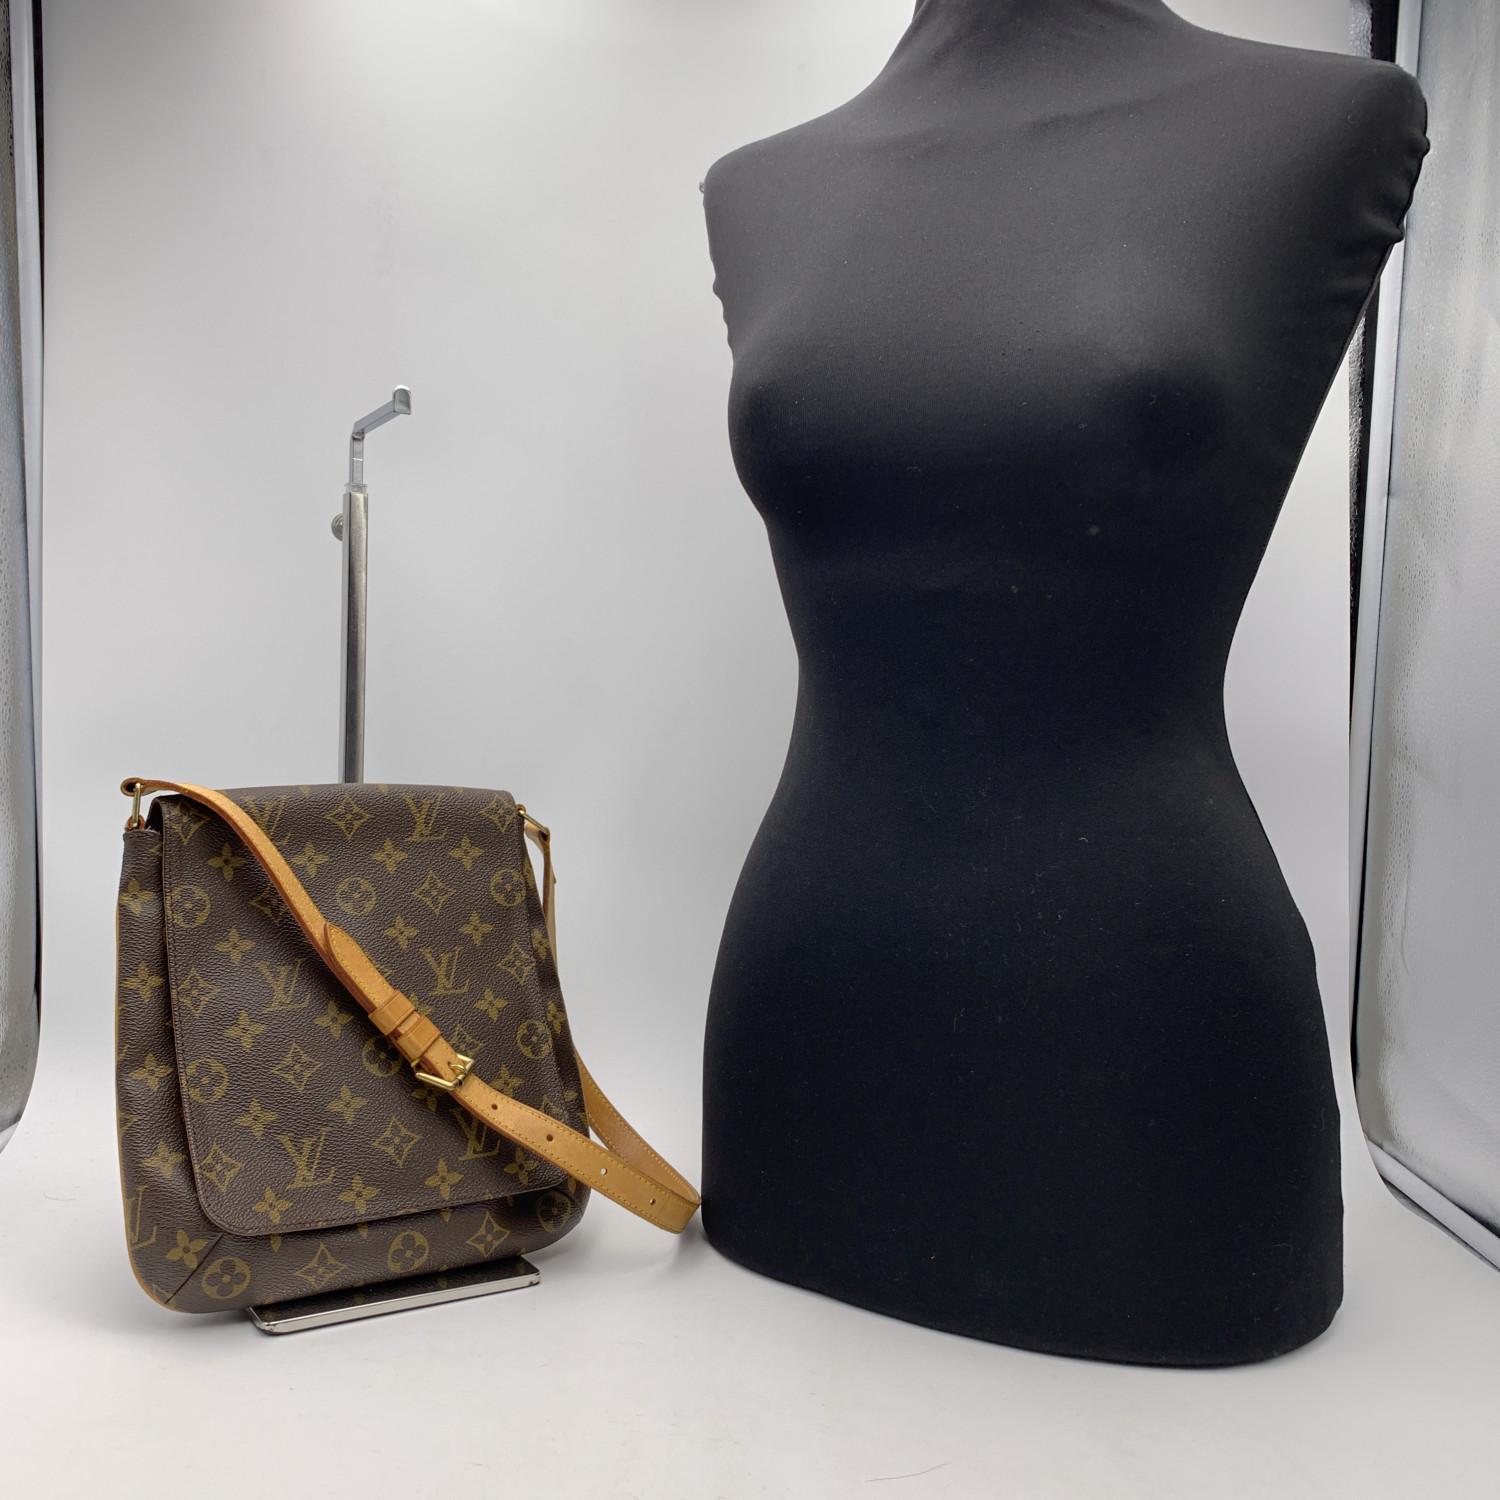 Louis Vuitton 'Musette Salsa'Shoulder Bag, crafted in timeless LV monogram canvas, the bag has golden brass hardware. The exterior features a flap with magnetic button closure. Its interior is lined with soft mustard lining and features 1 open